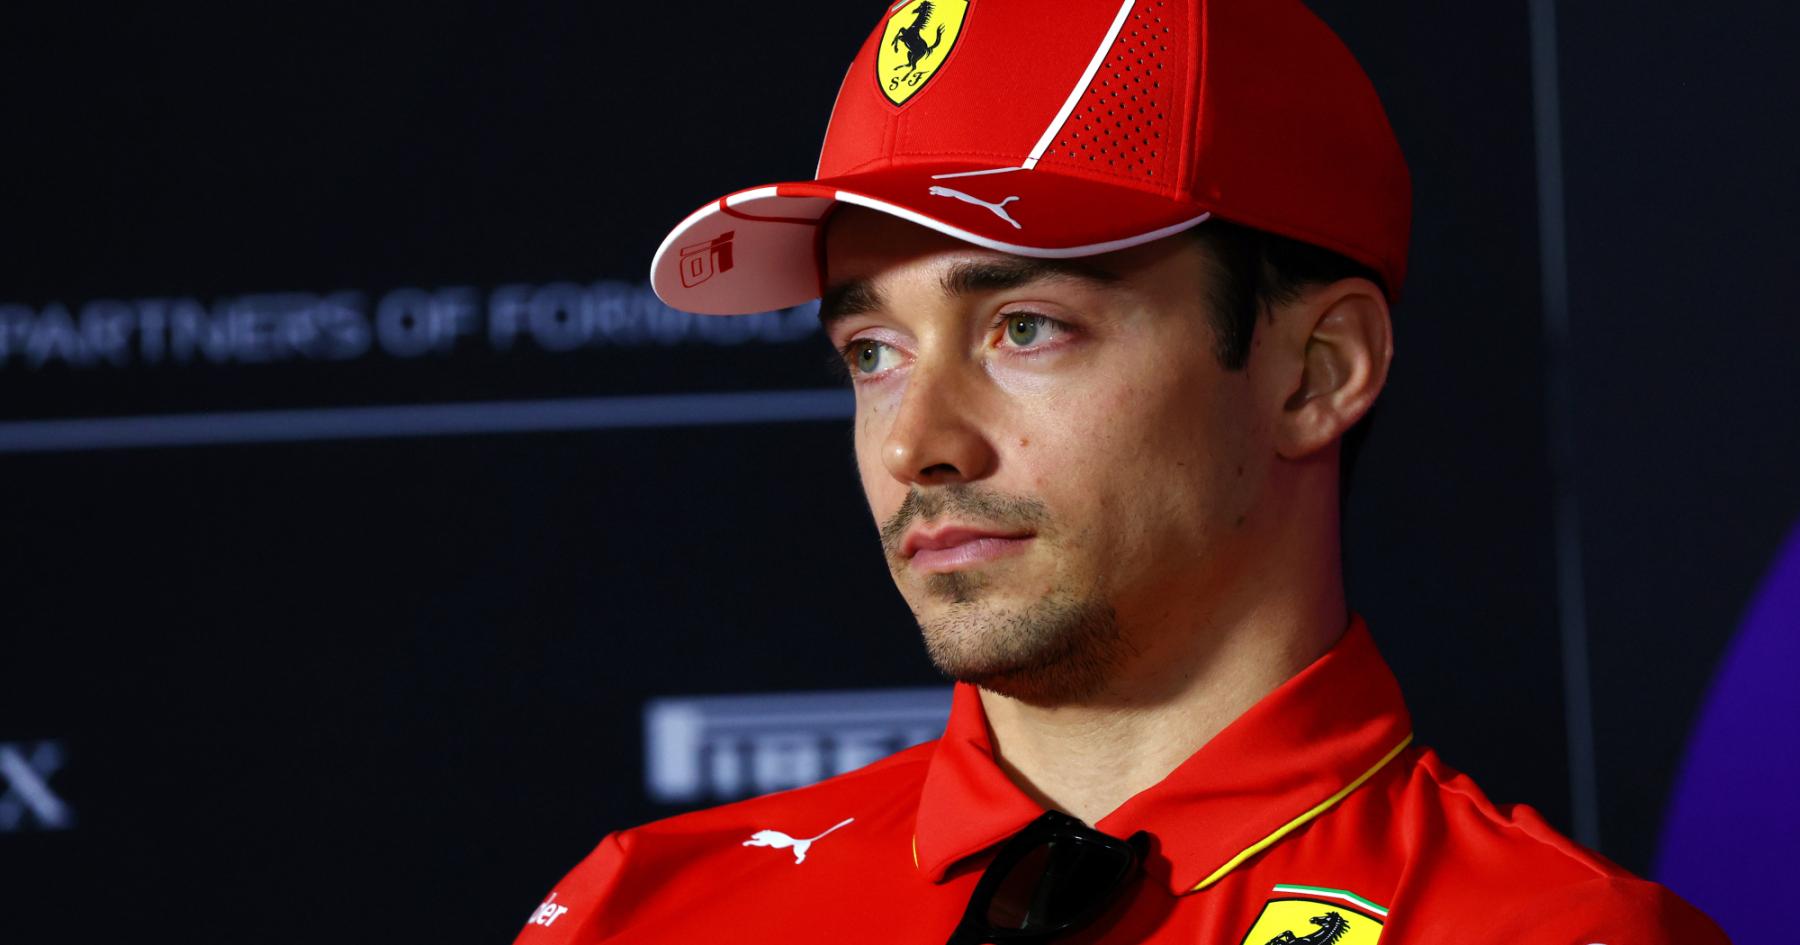 The Leclerc Dilemma: Ferrari's Qualifying Controversy Sparks Discontent